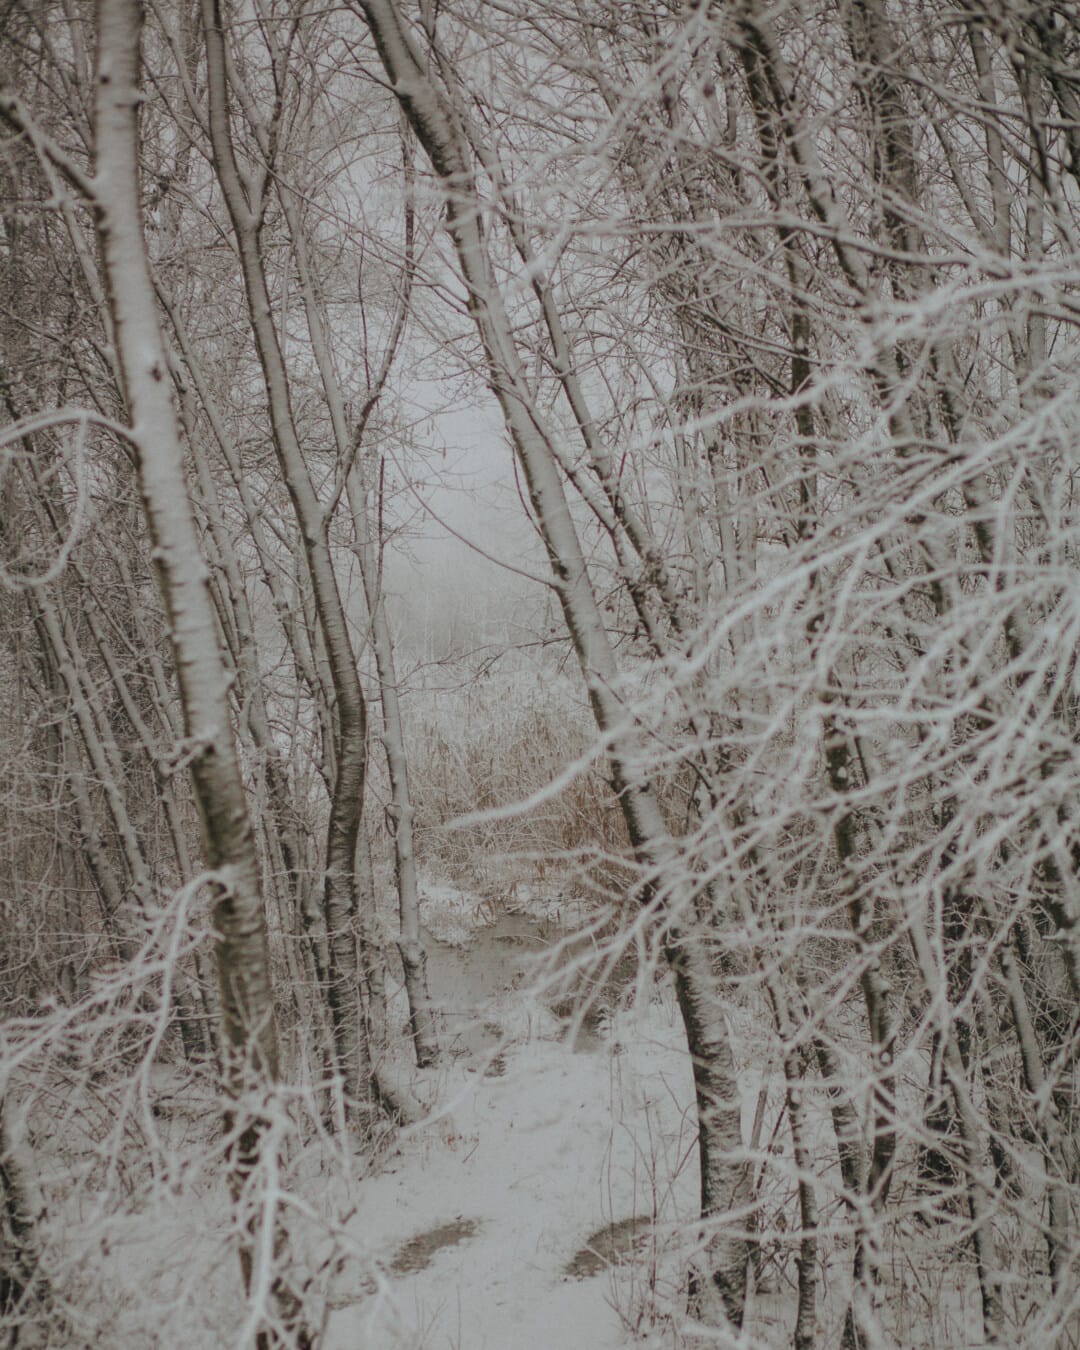 snow, snowy, forest, frost, frozen, branches, tree, landscape, winter, wood